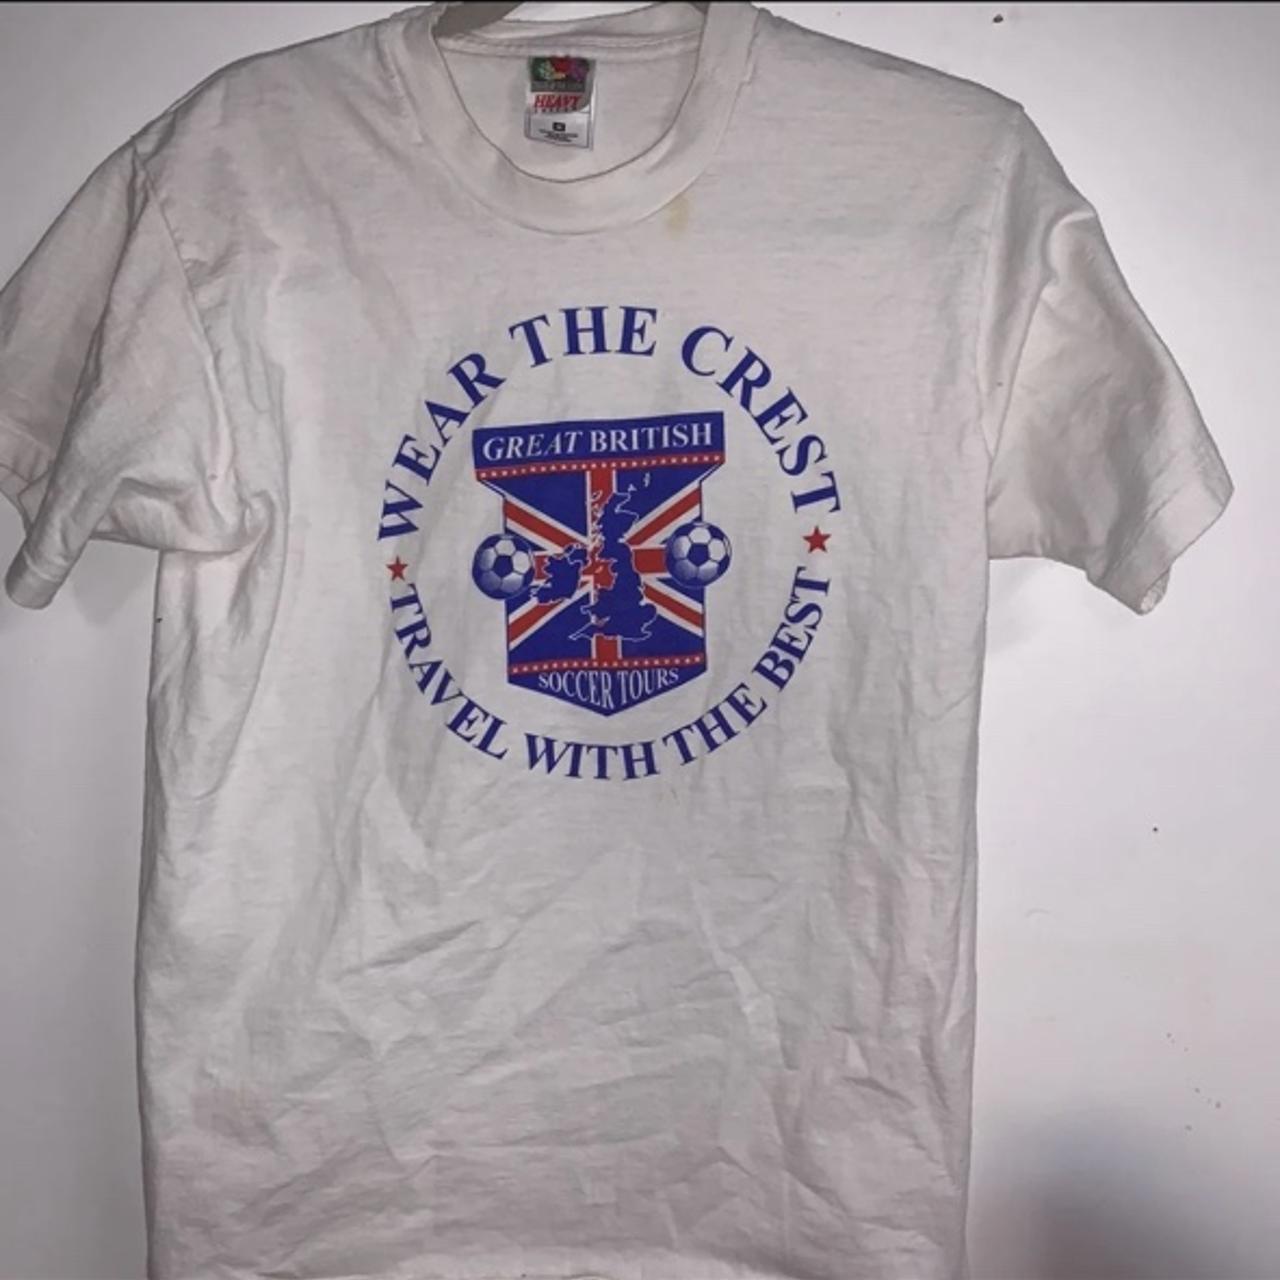 Product Image 1 - Vintage 1990’s Lotto soccer t-shirt